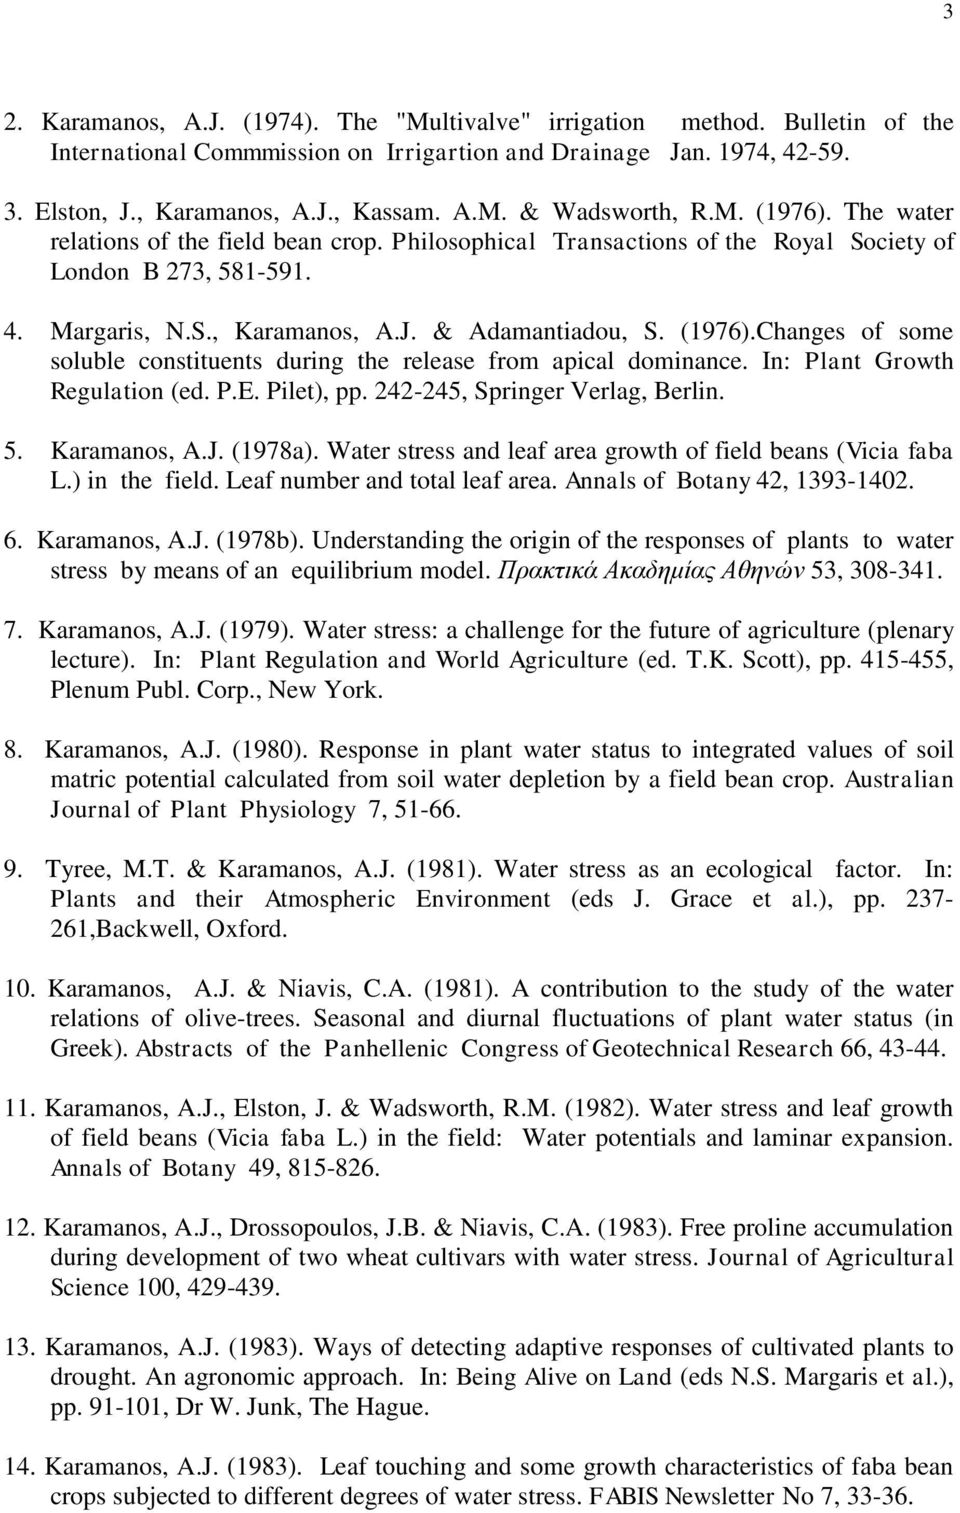 In: Plant Growth Regulation (ed. P.E. Pilet), pp. 242-245, Springer Verlag, Berlin. 5. Karamanos, A.J. (1978a). Water stress and leaf area growth of field beans (Vicia faba L.) in the field.